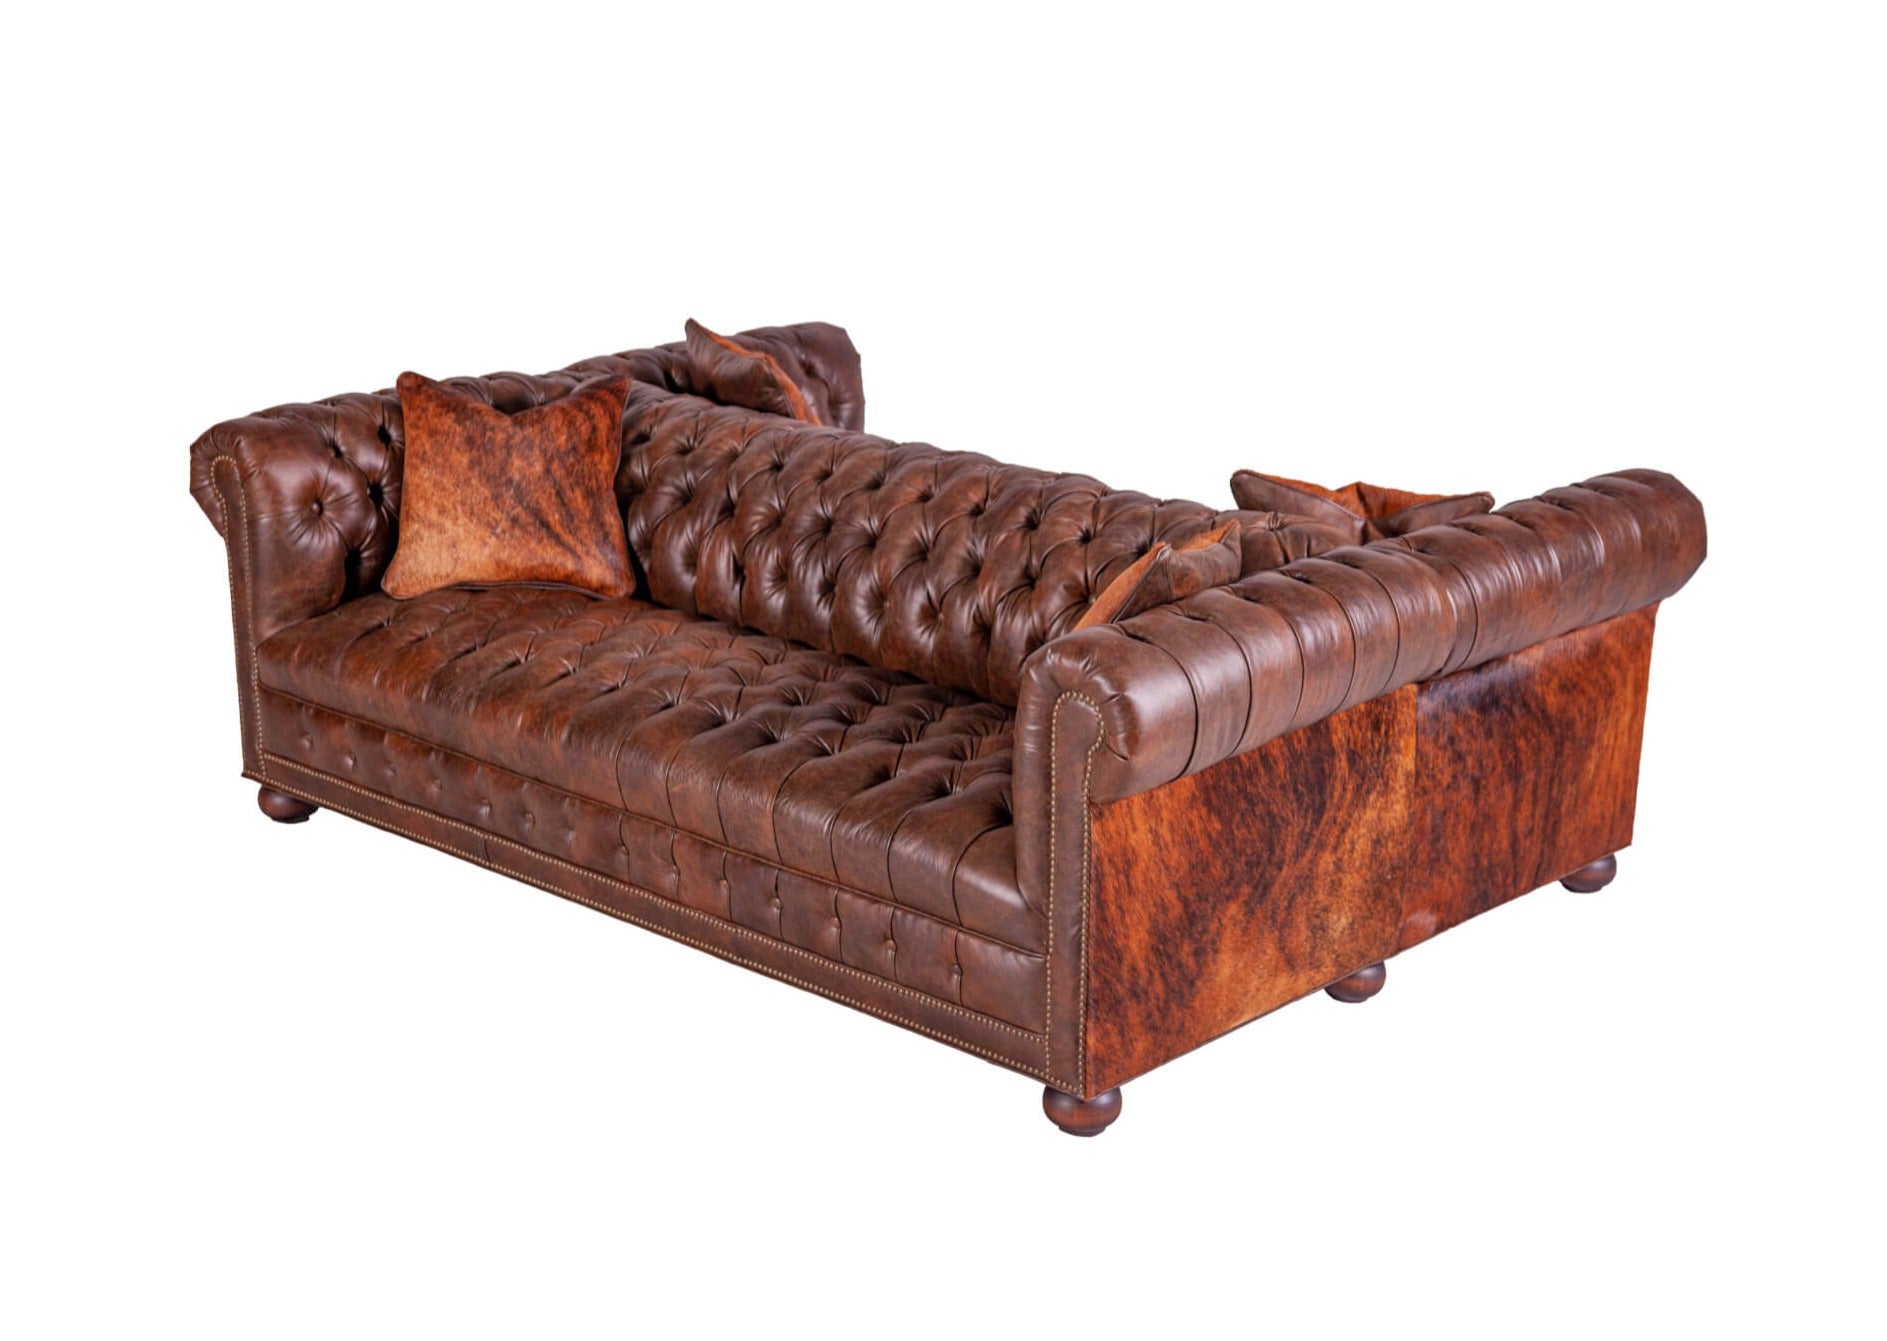 This luxurious Double Chesterfield Roll Arm Leather Sofa poses the perfect balance of style and comfort. With its rolled arms, and premium leather upholstery, it is sure to be a timeless addition to any living room or commercial space, perfect for conversation.